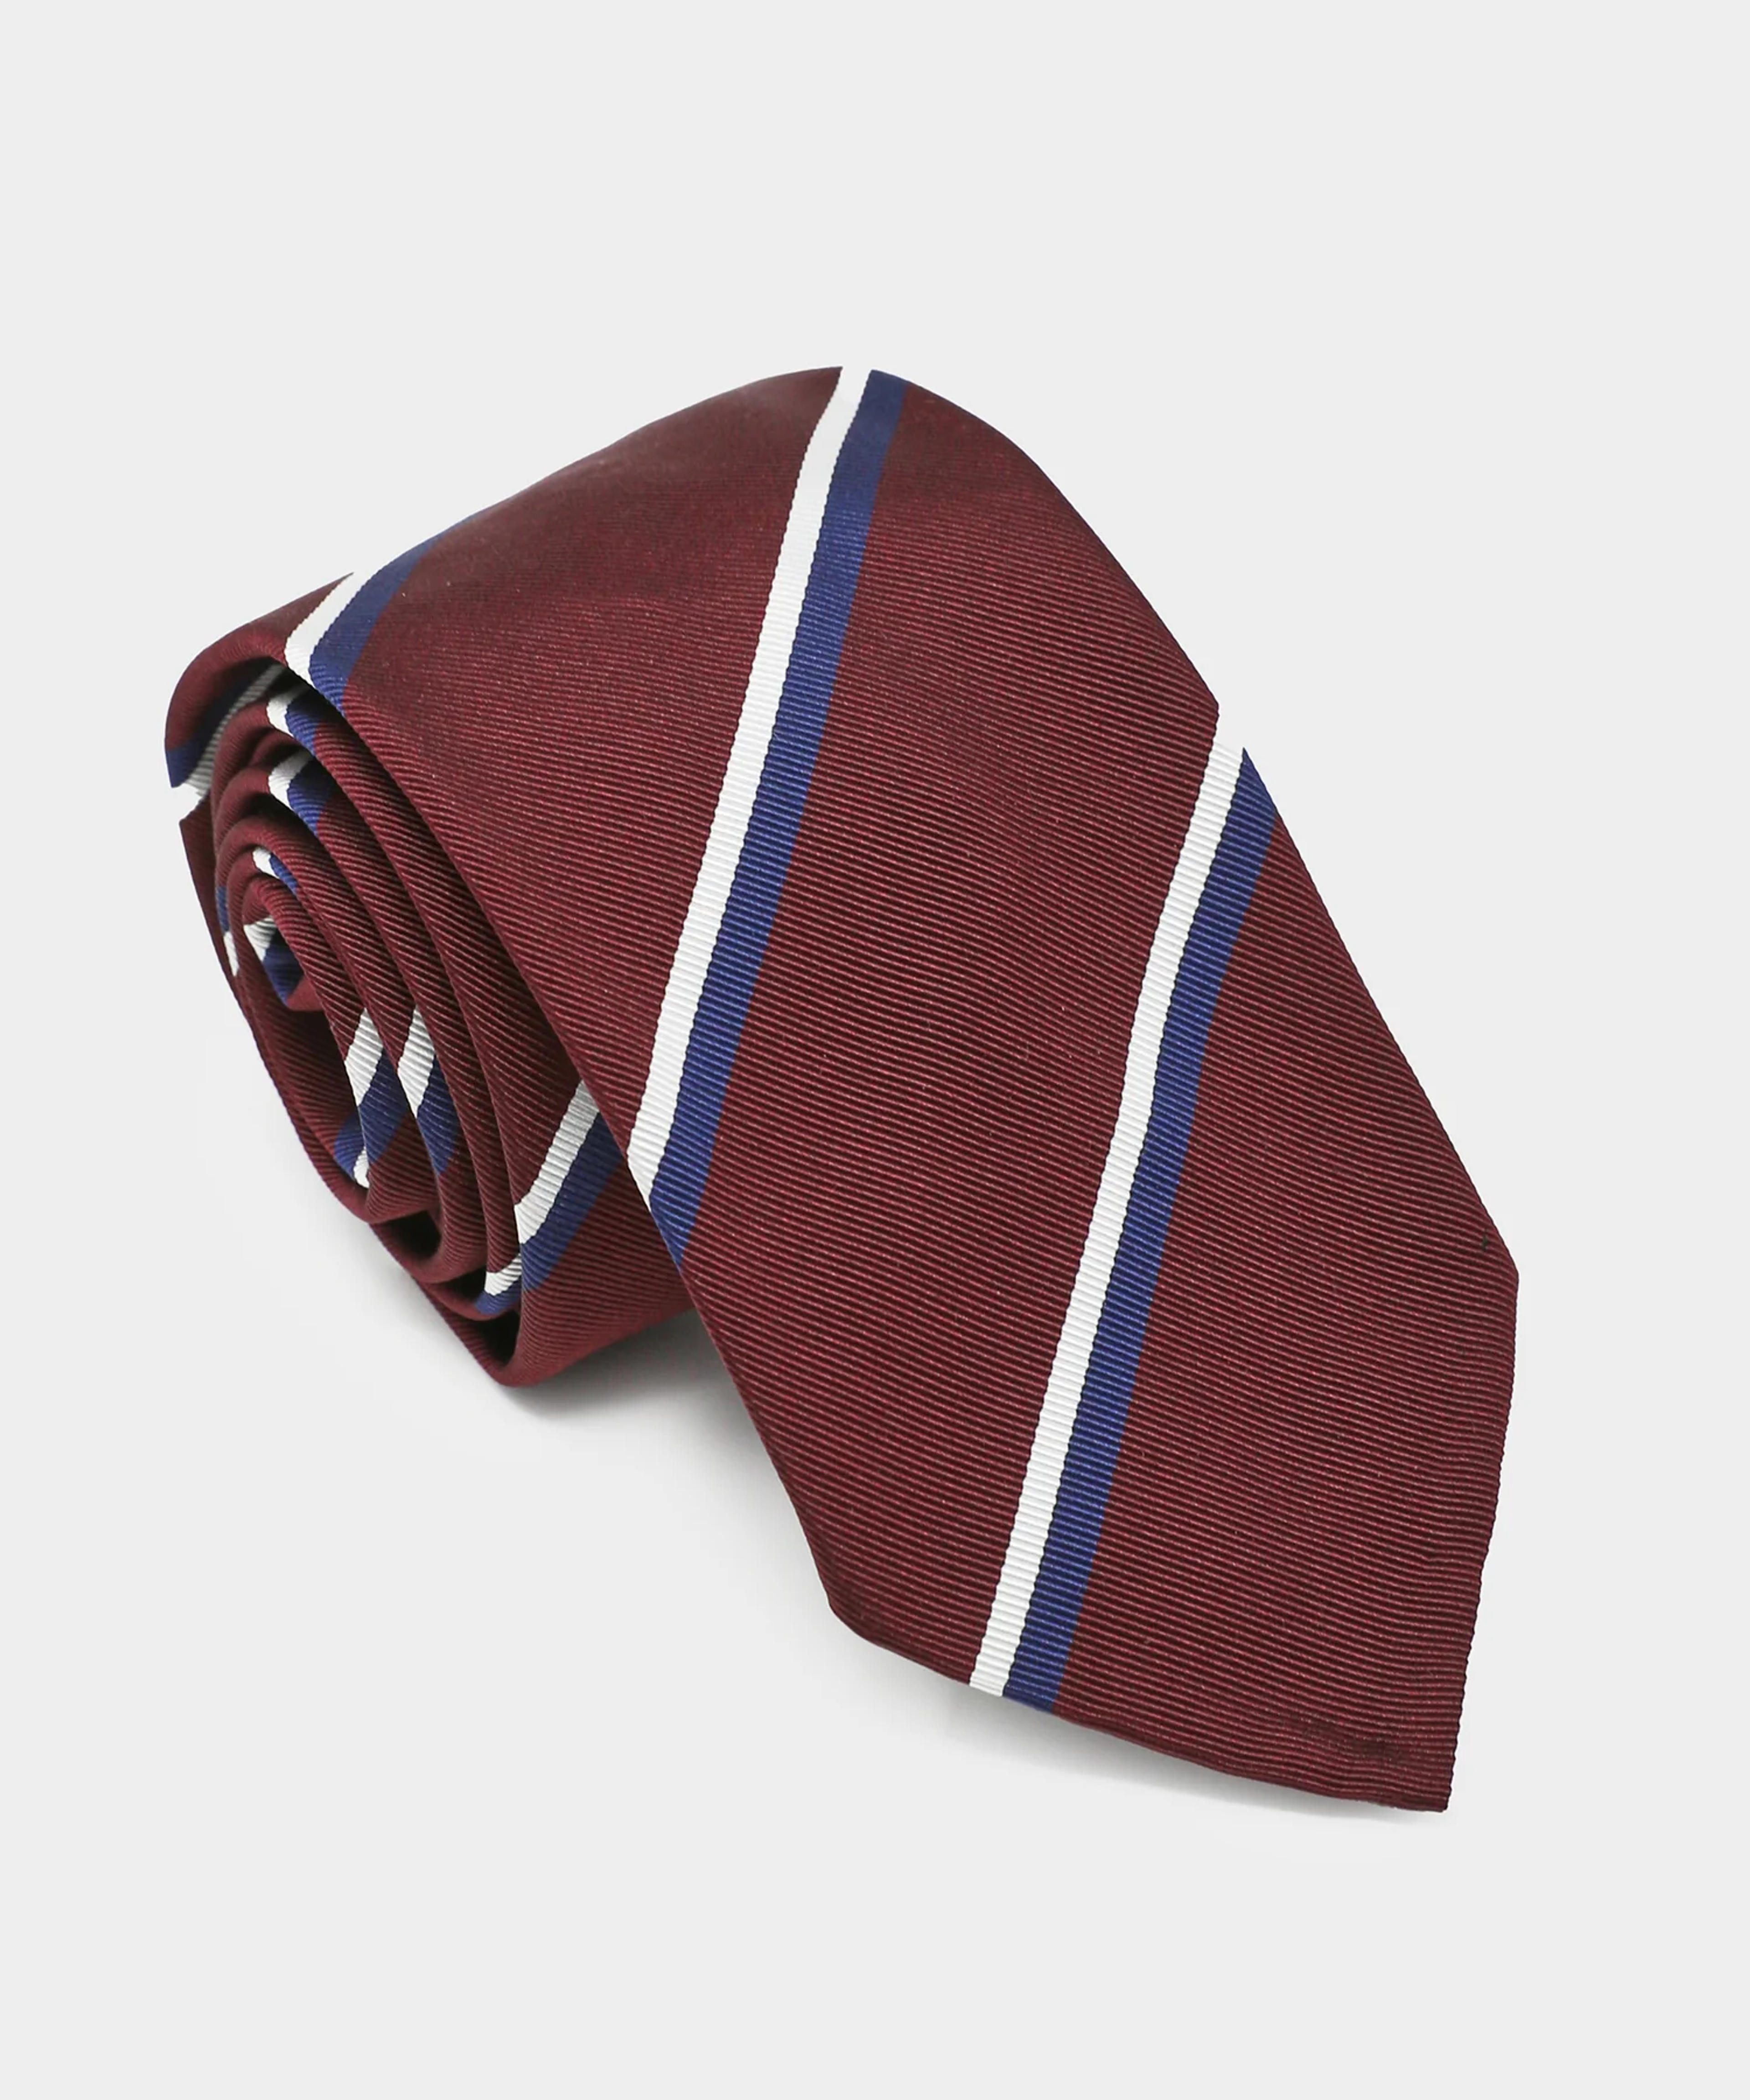 toddsnyder.com/products/brown-stripe-repp-tie-brown